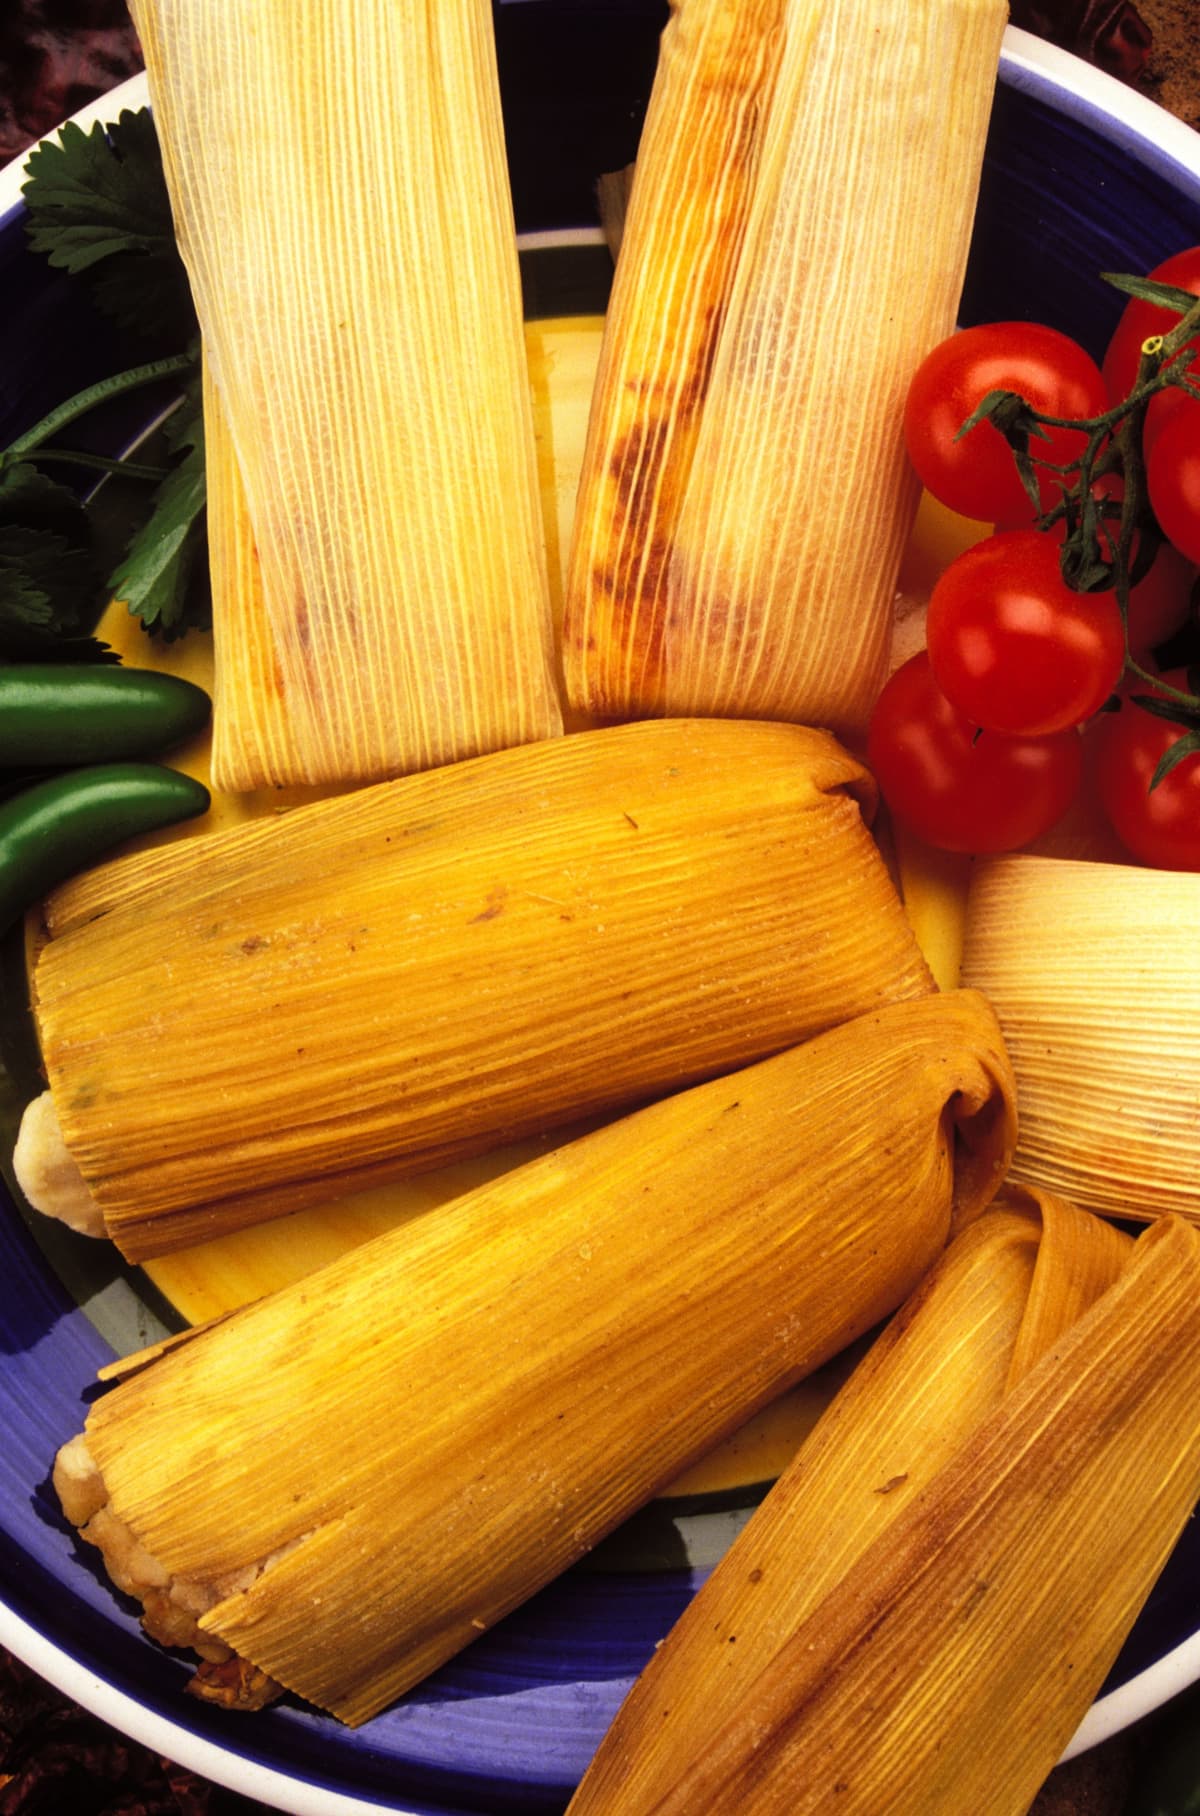 A plate of tamales, tomatoes, and chiles.